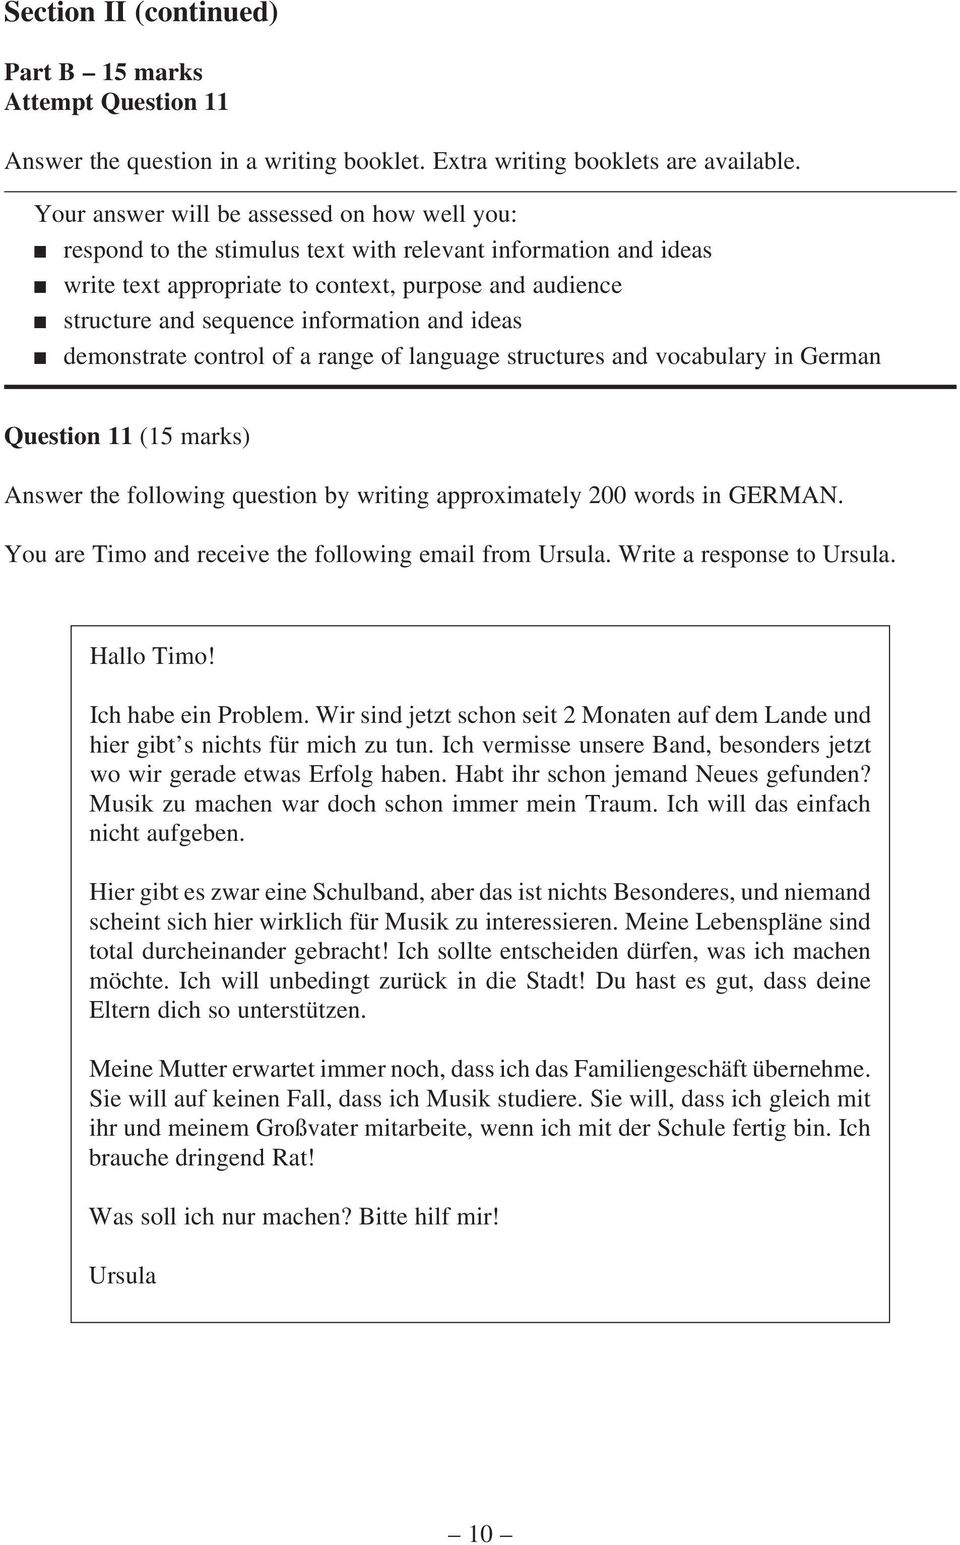 information and ideas n demonstrate control of a range of language structures and vocabulary in German Question 11 (15 marks) Answer the following question by writing approximately 200 words in